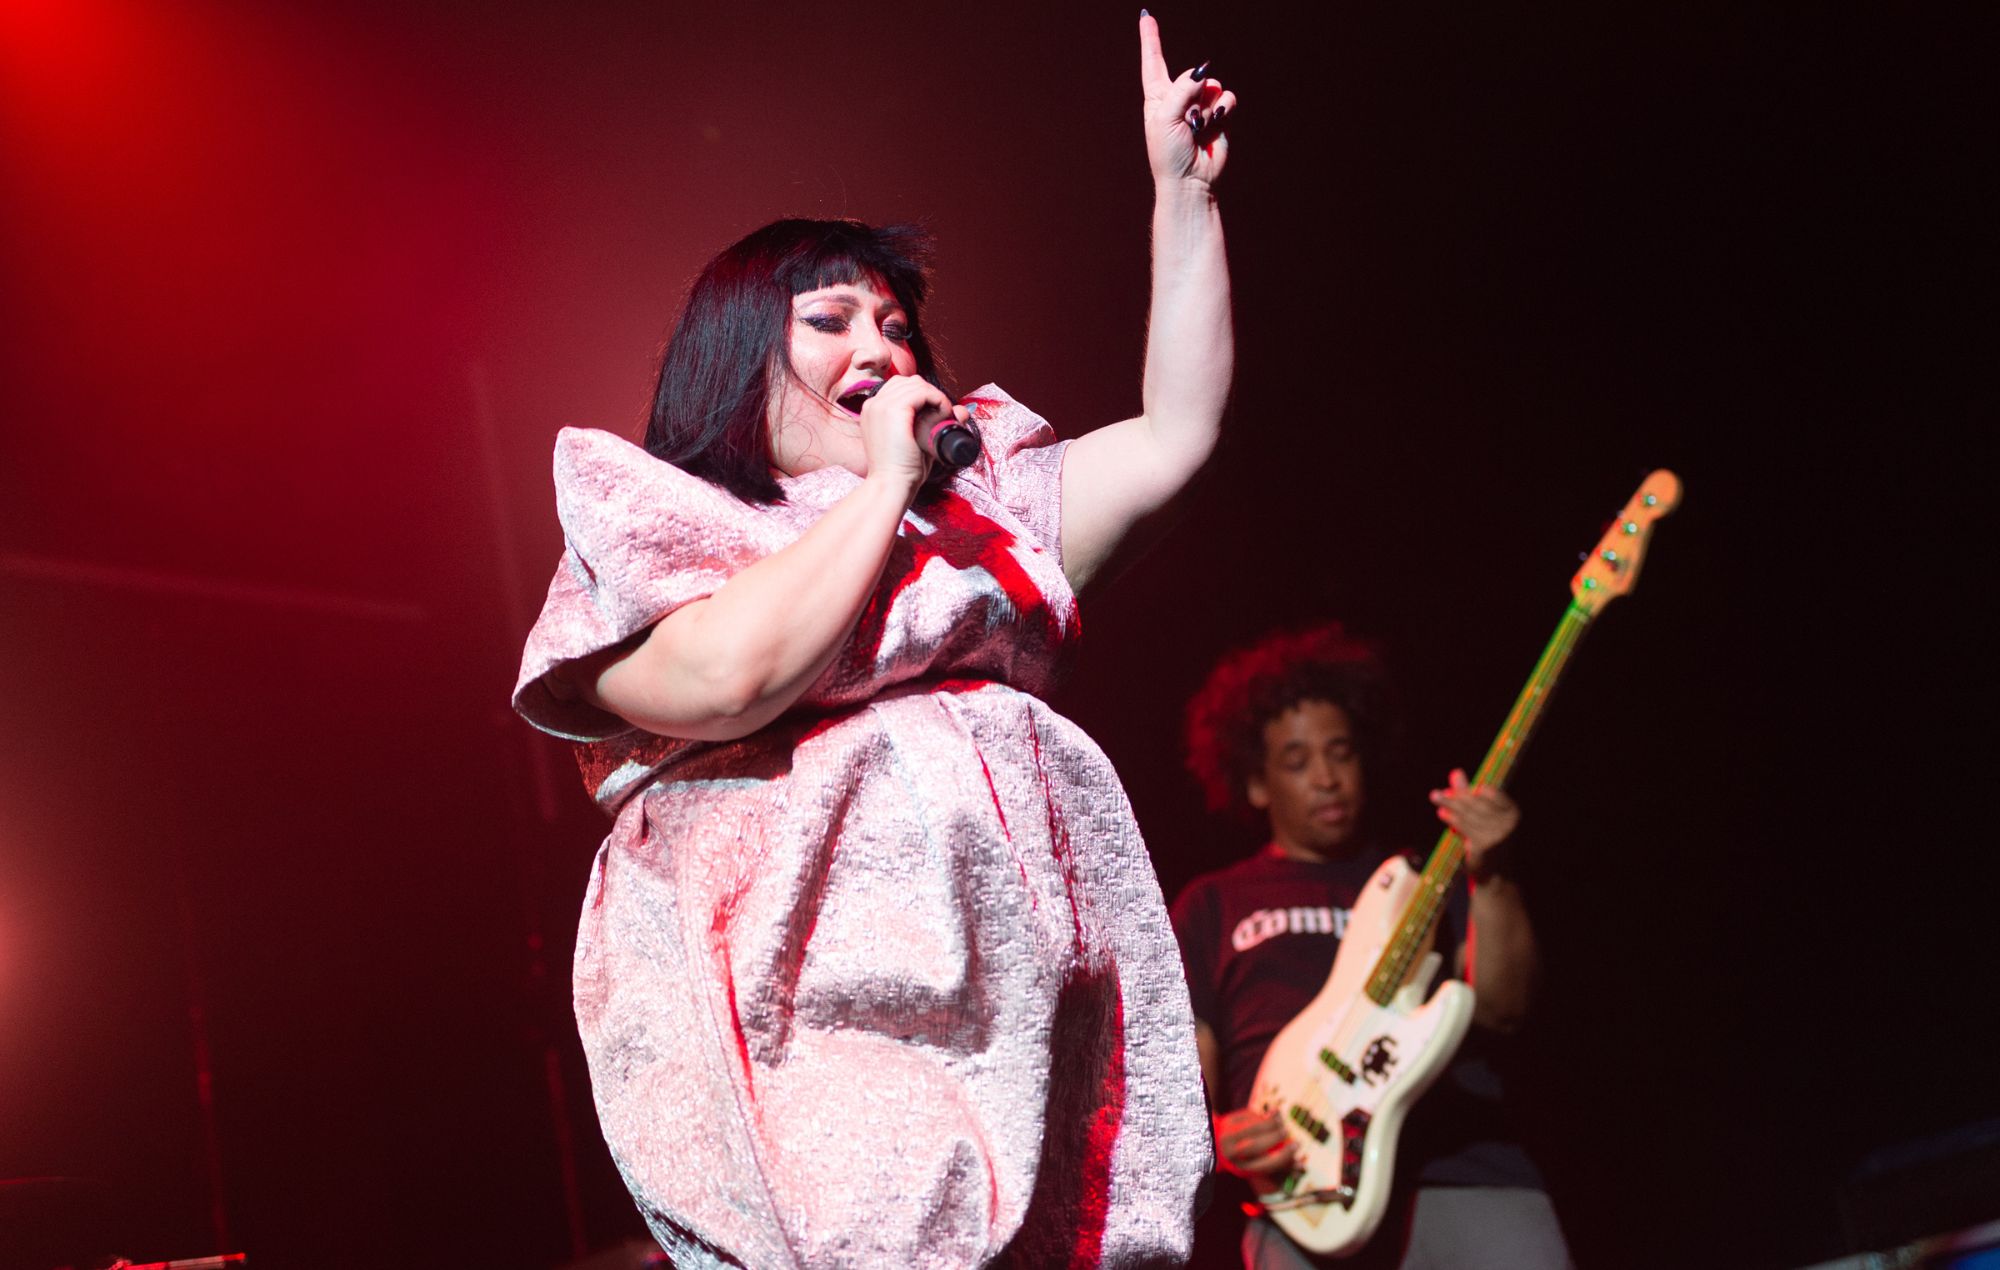 Beth Ditto and Christopher Sutton of Gossip perform on stage at SWG3 in Glasgow, Scotland.